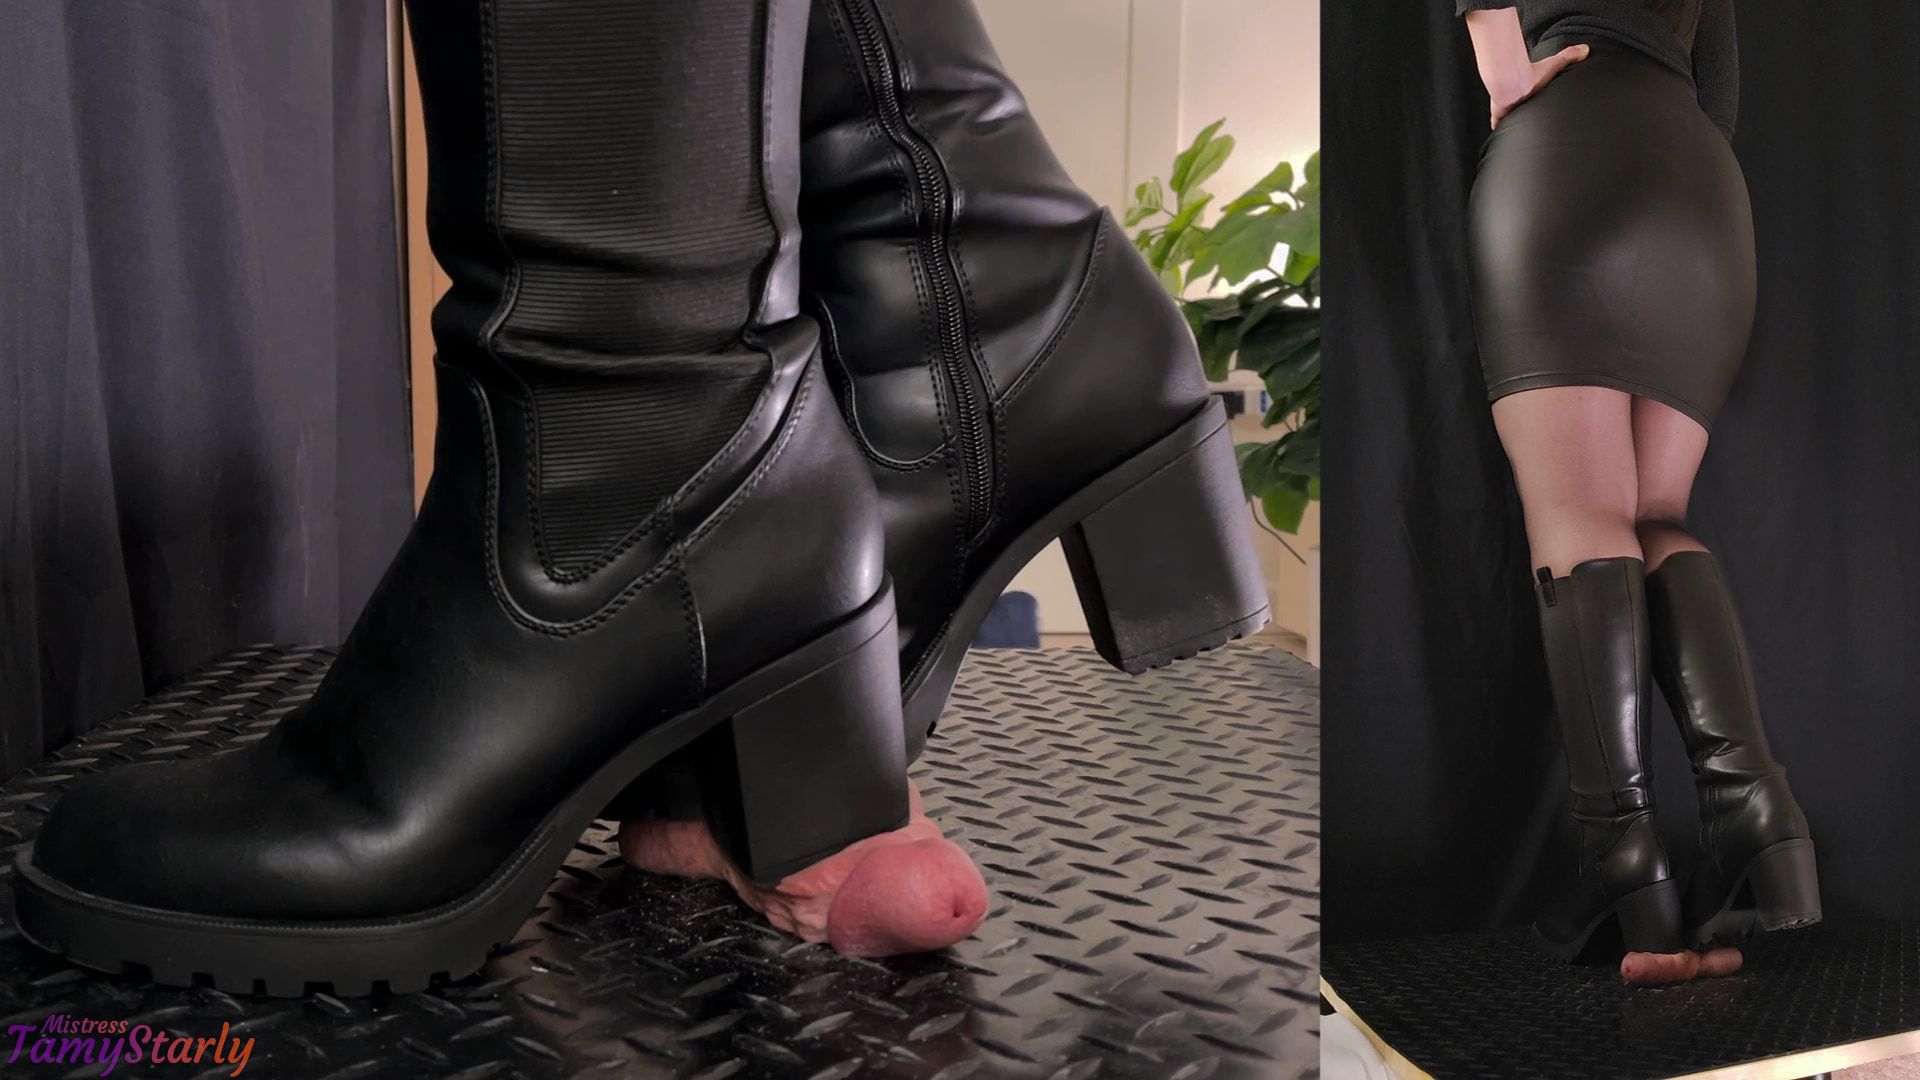 Boss Punishment in Leather Boots - Bootjob, Shoejob #4